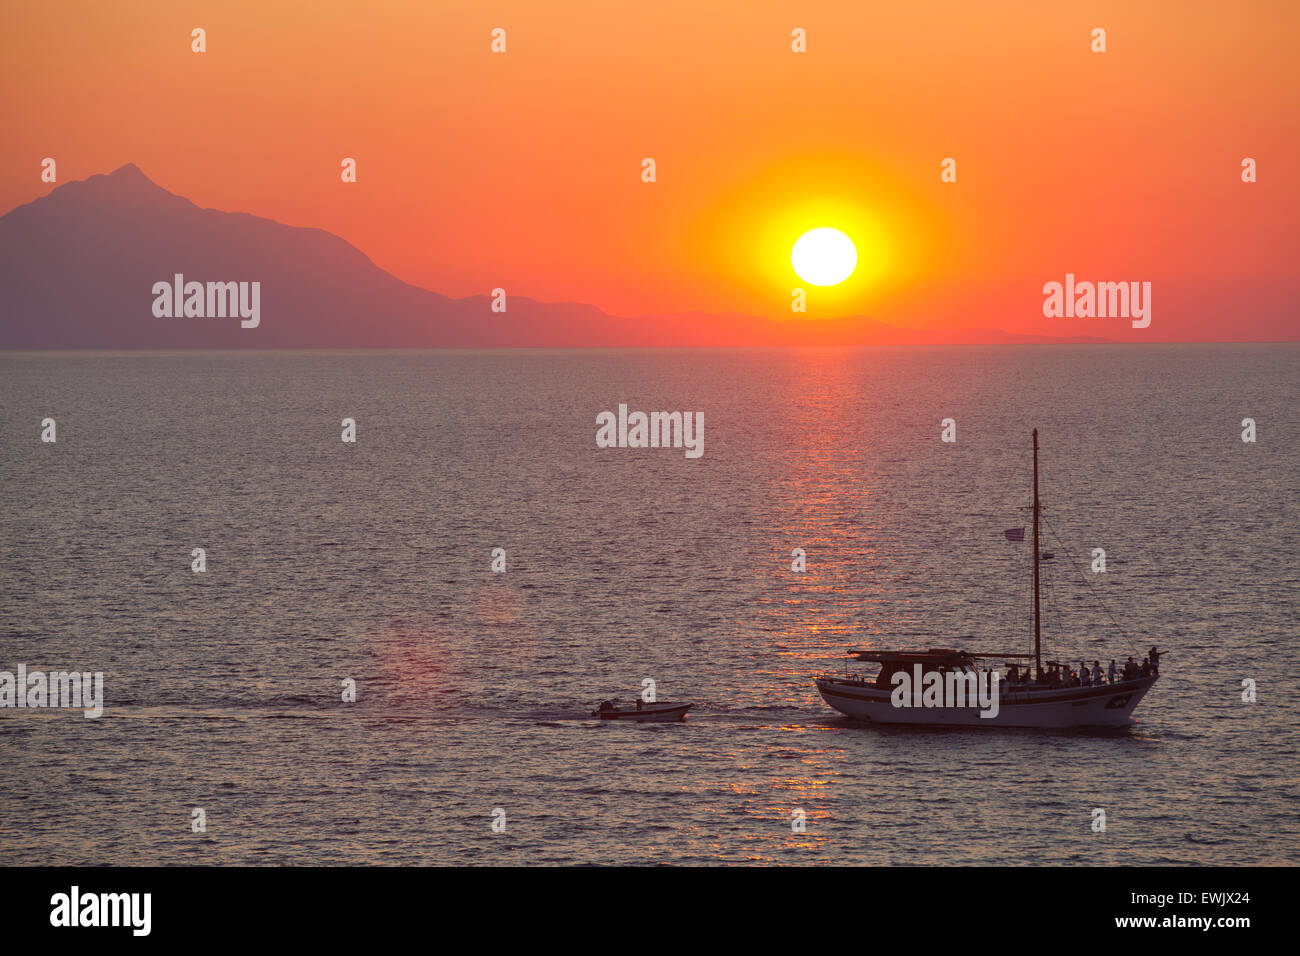 Sunset seen from Myrina looking out towards Mount Athos, Lemnos (Limnos) Island, Greek islands, Northern Greece, Aegean Sea Stock Photo